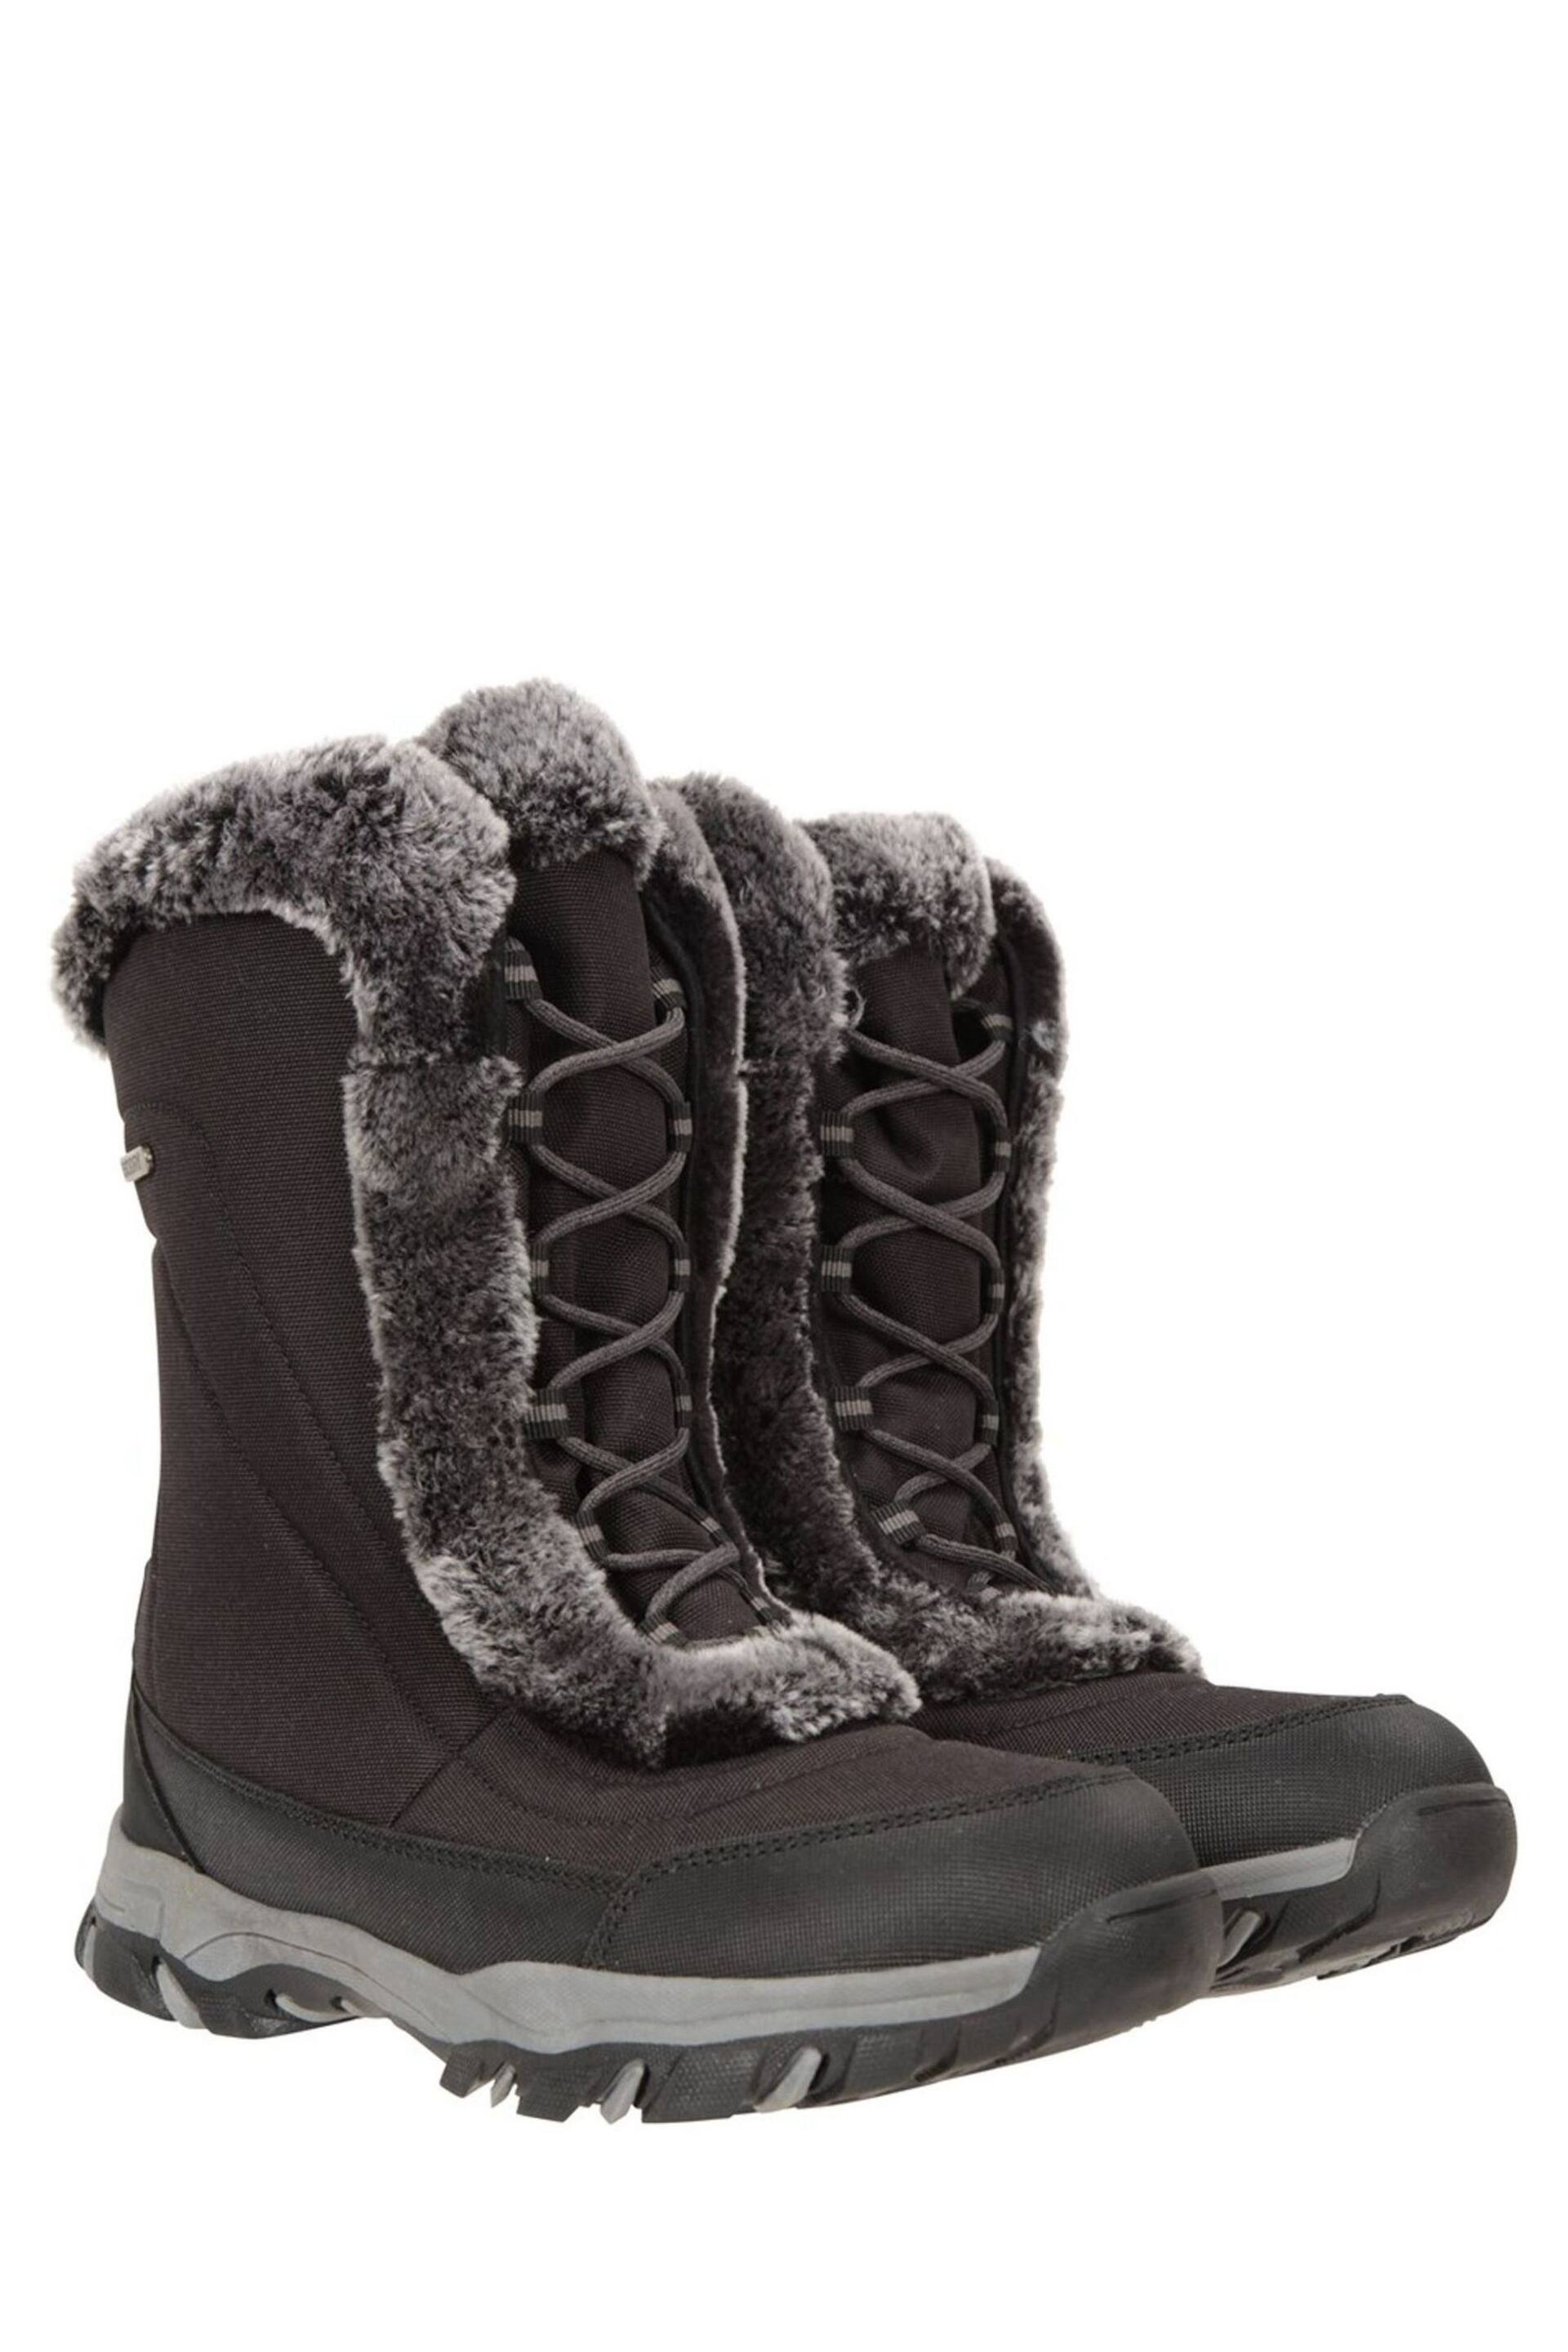 Mountain Warehouse Black Womens Ohio Thermal Fleece Lined Snow Boots - Image 2 of 6